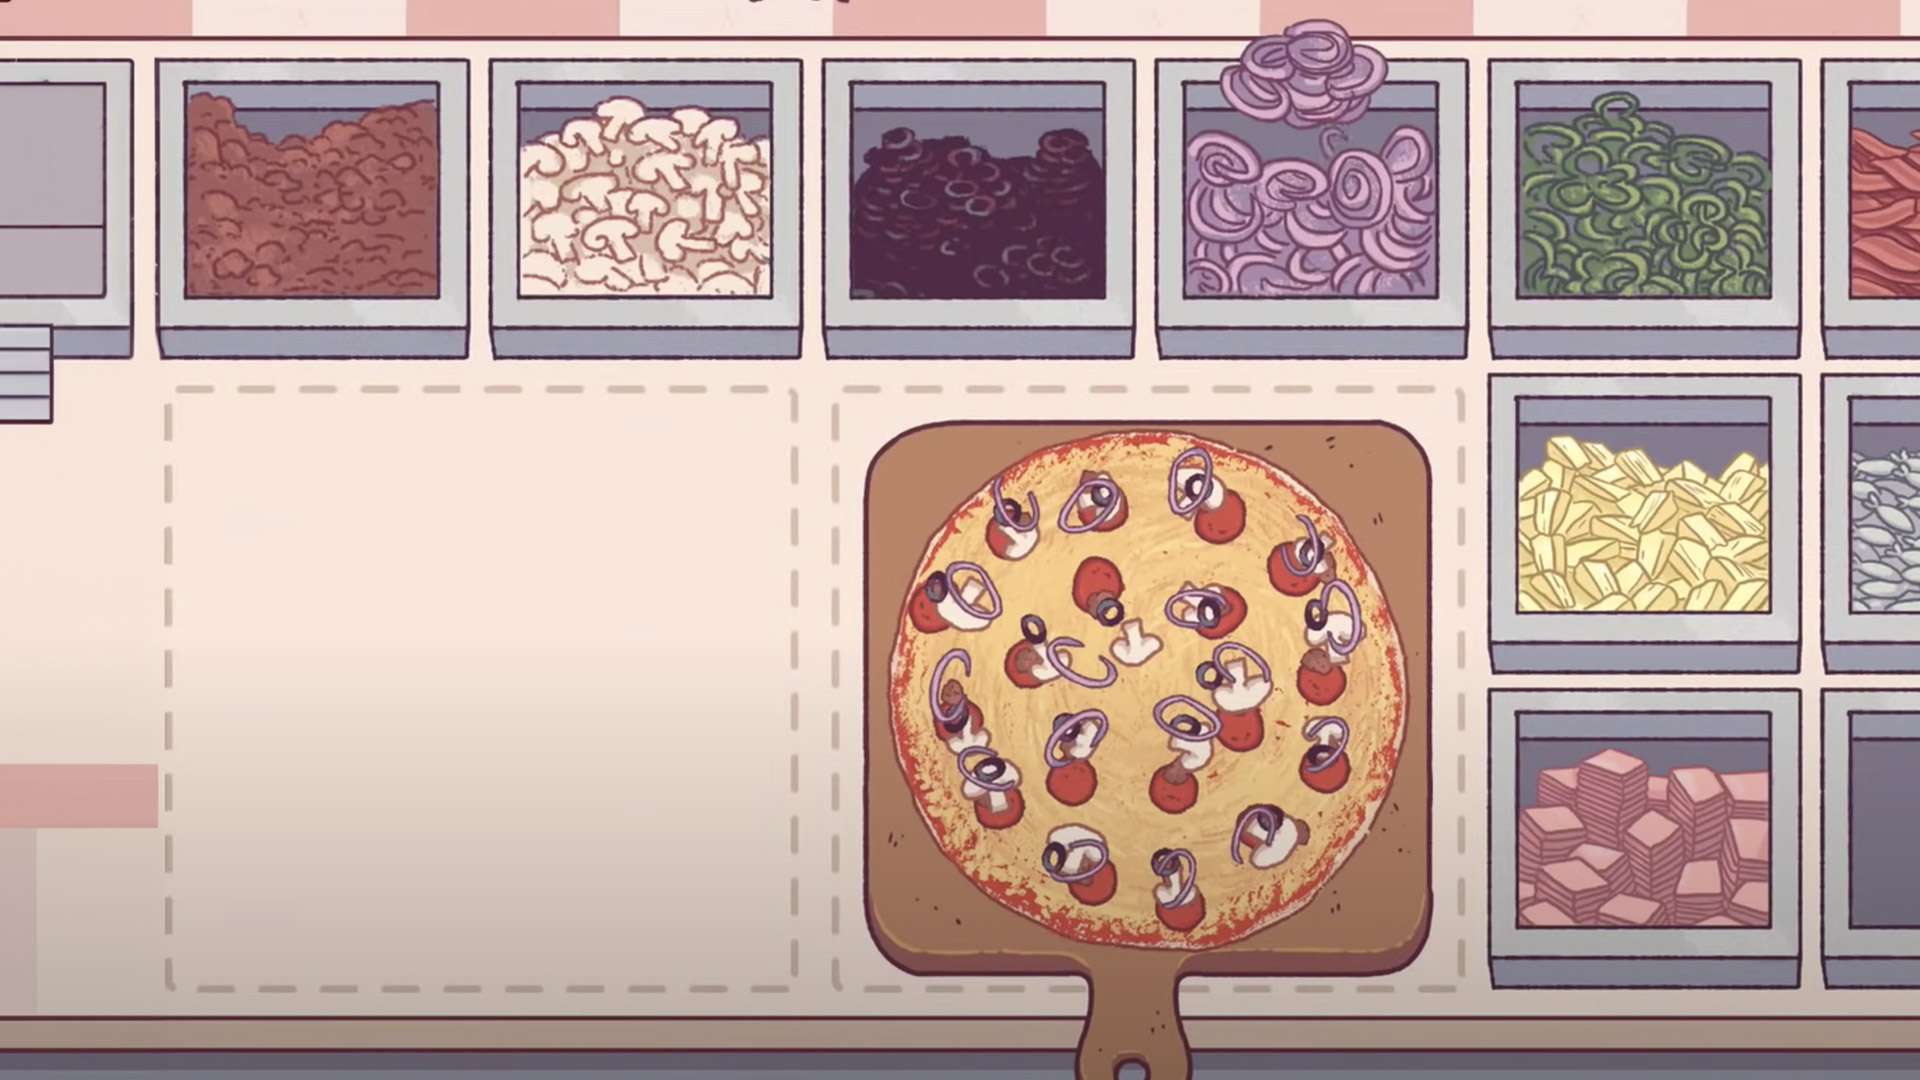 Good Pizza, Great Pizza - Cooking Simulator Game Requisitos